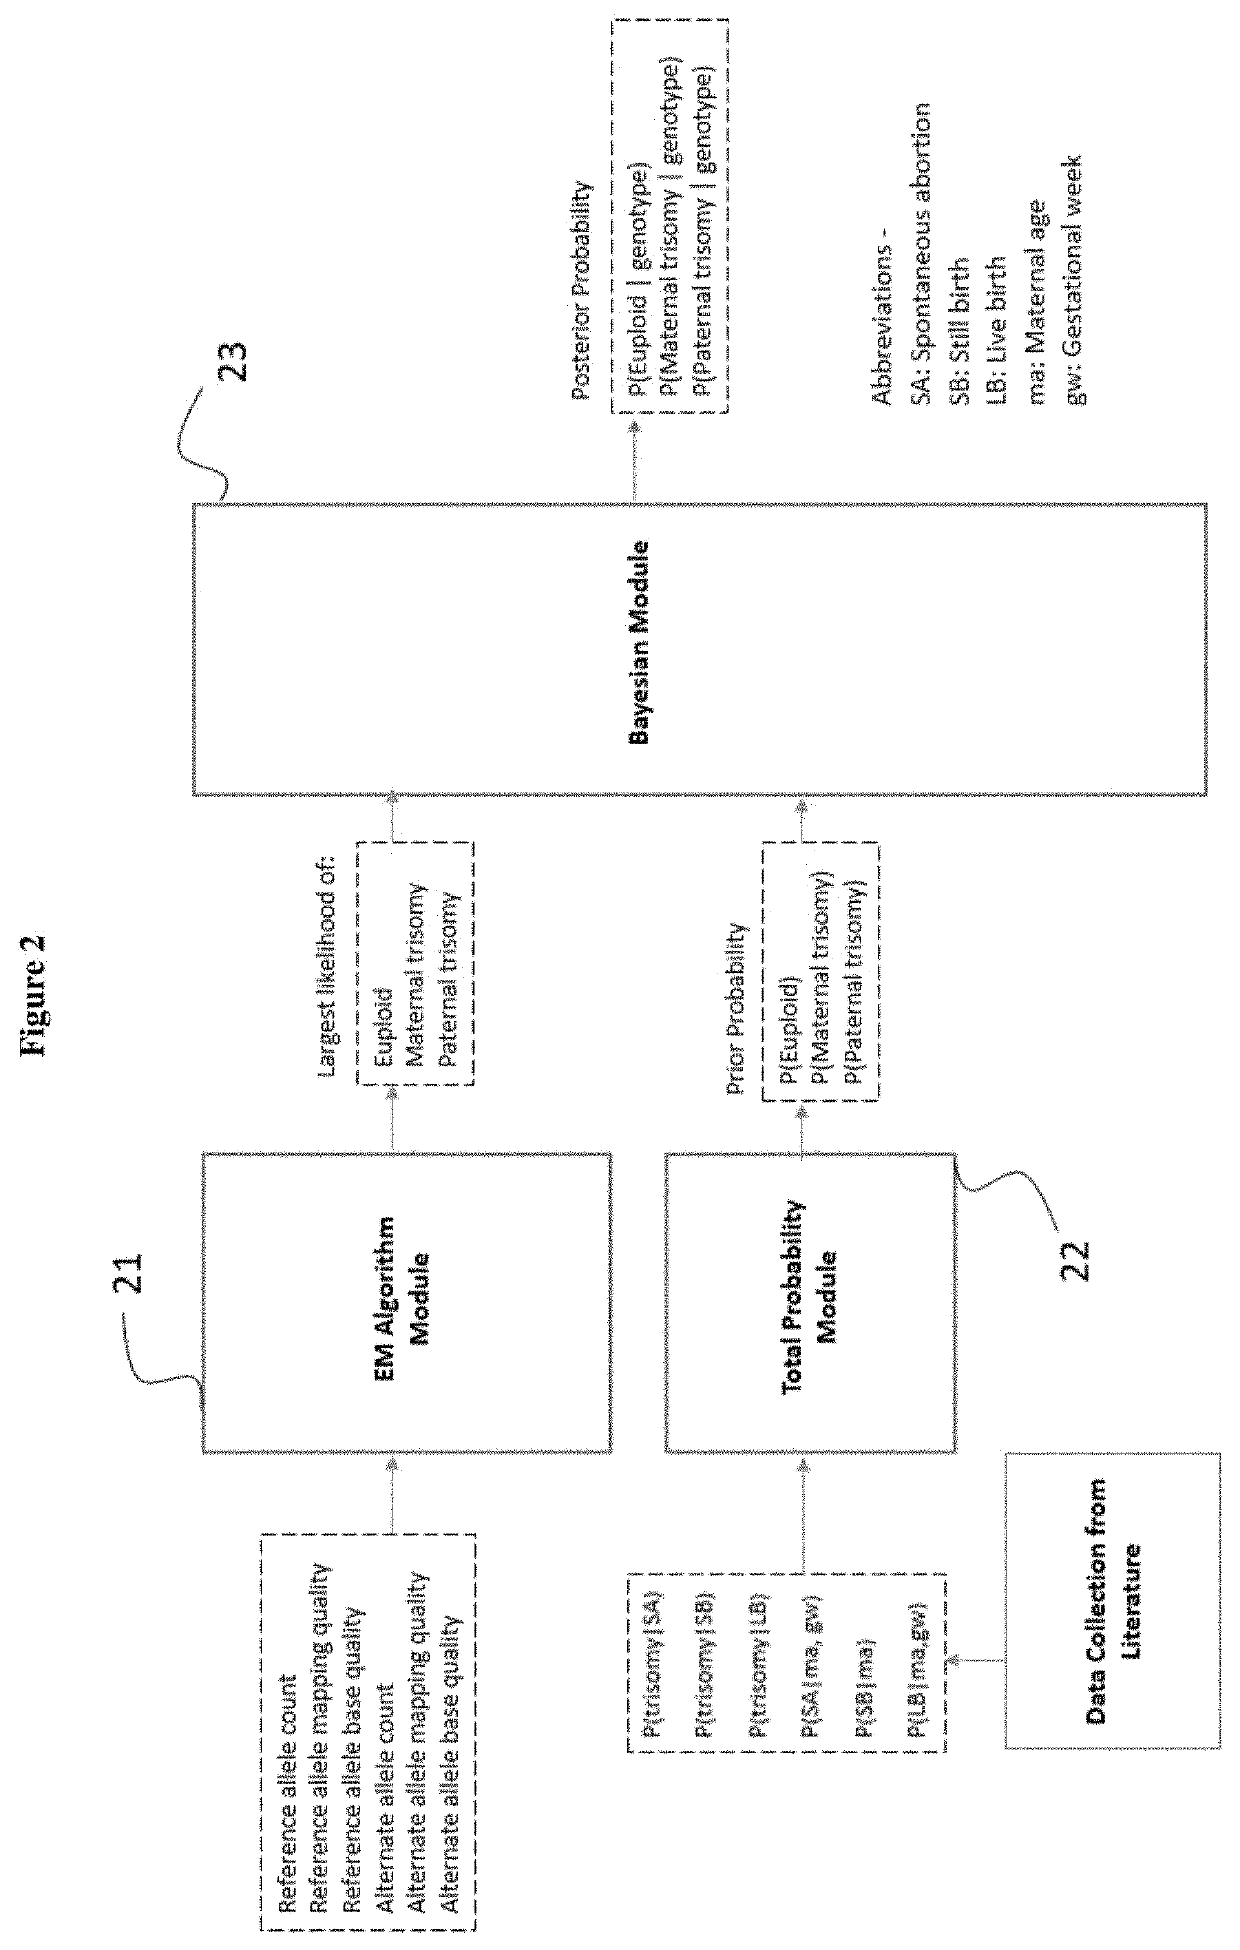 Methods for non-invasive prenatal determination of aneuploidy using targeted next generation sequencing of biallelic snps